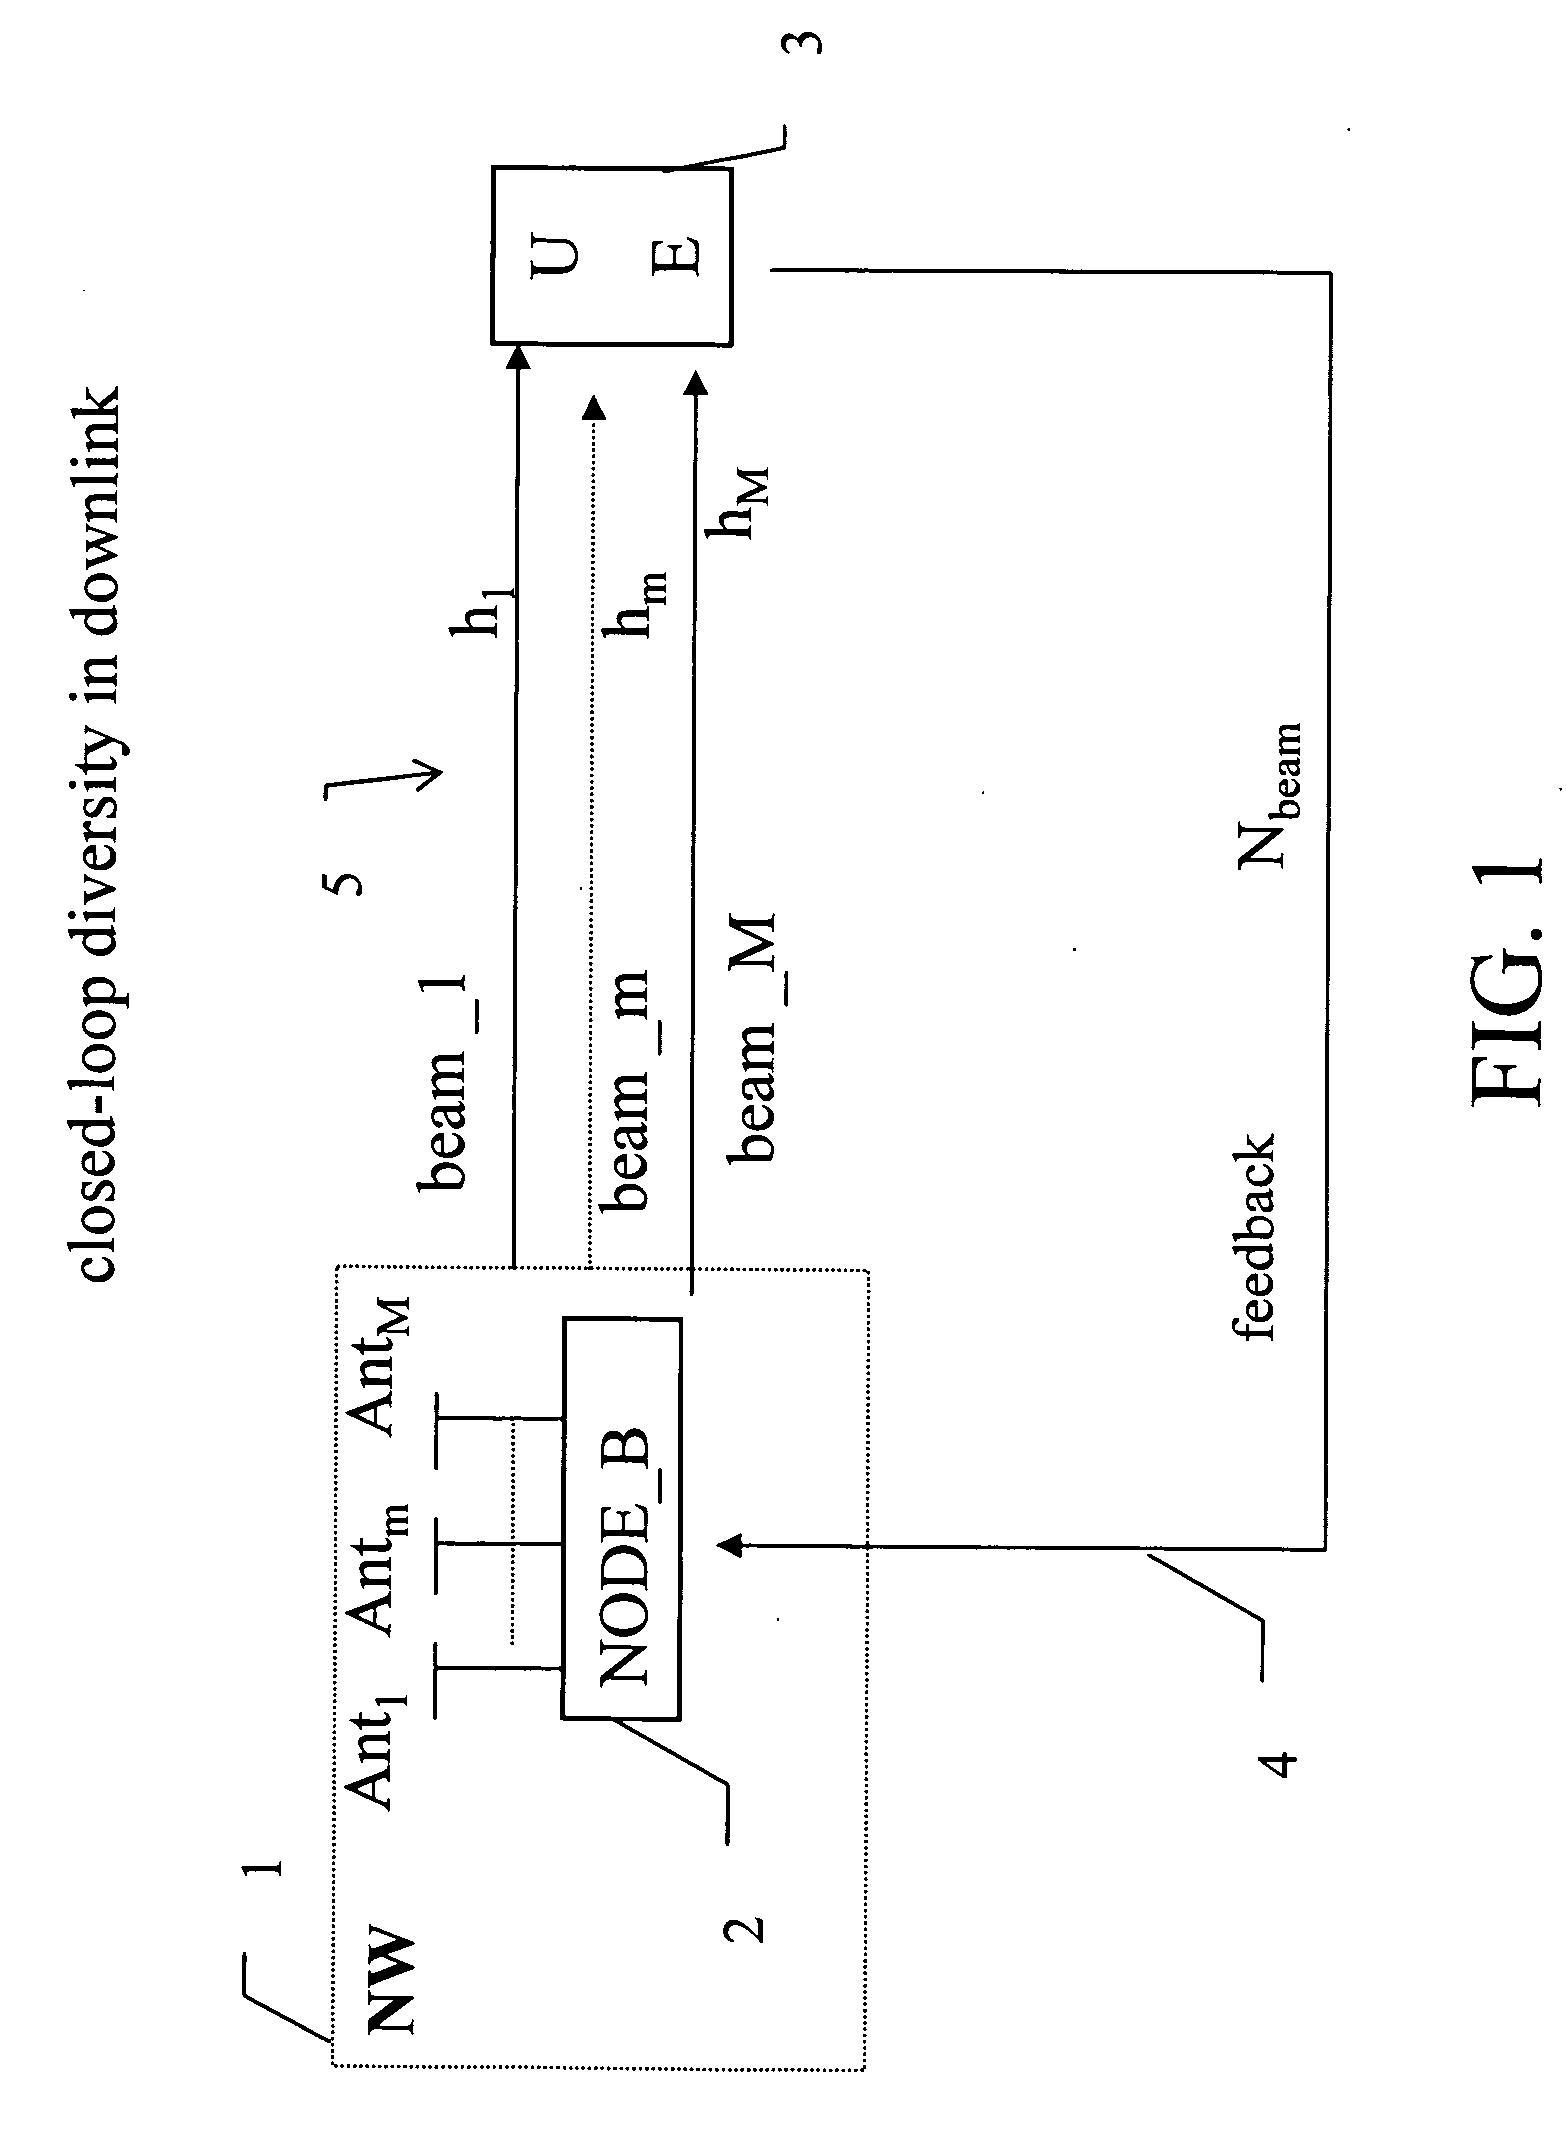 Closed-loop signalling method for controlling multiple transmit beams and correspondingly adapted transceiver devices